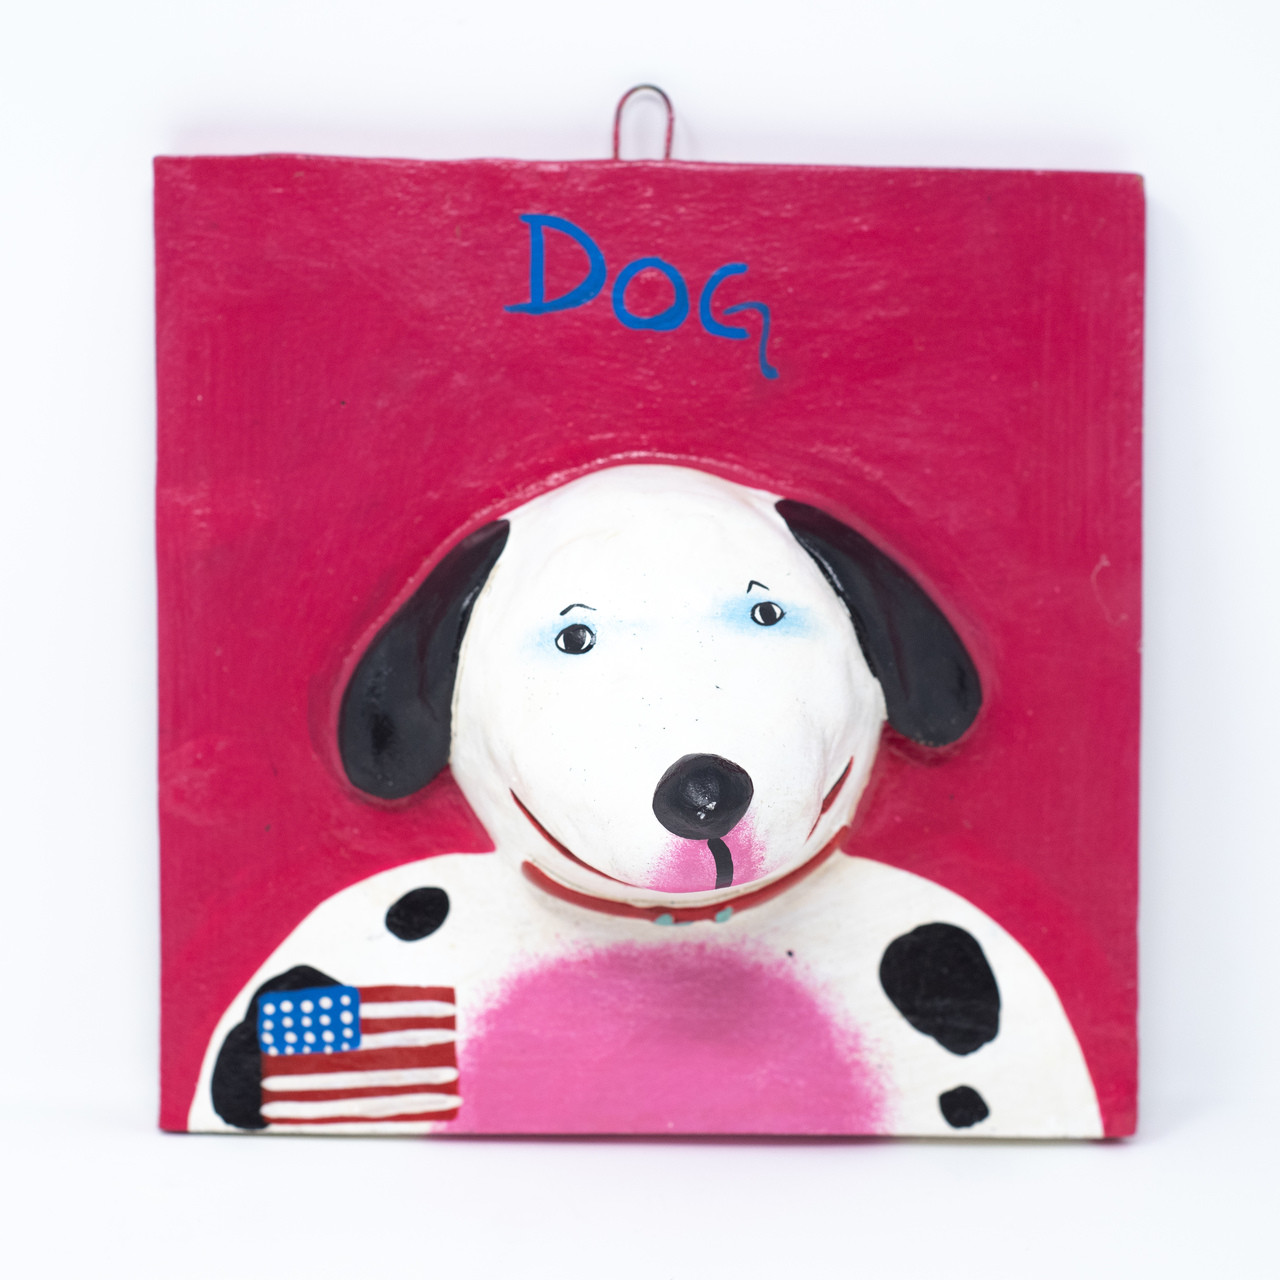 United States of America, Dog, Perro, Loyal Friend, Furry Friend, One-of-a-Kind, Limited Edition, Sustainable